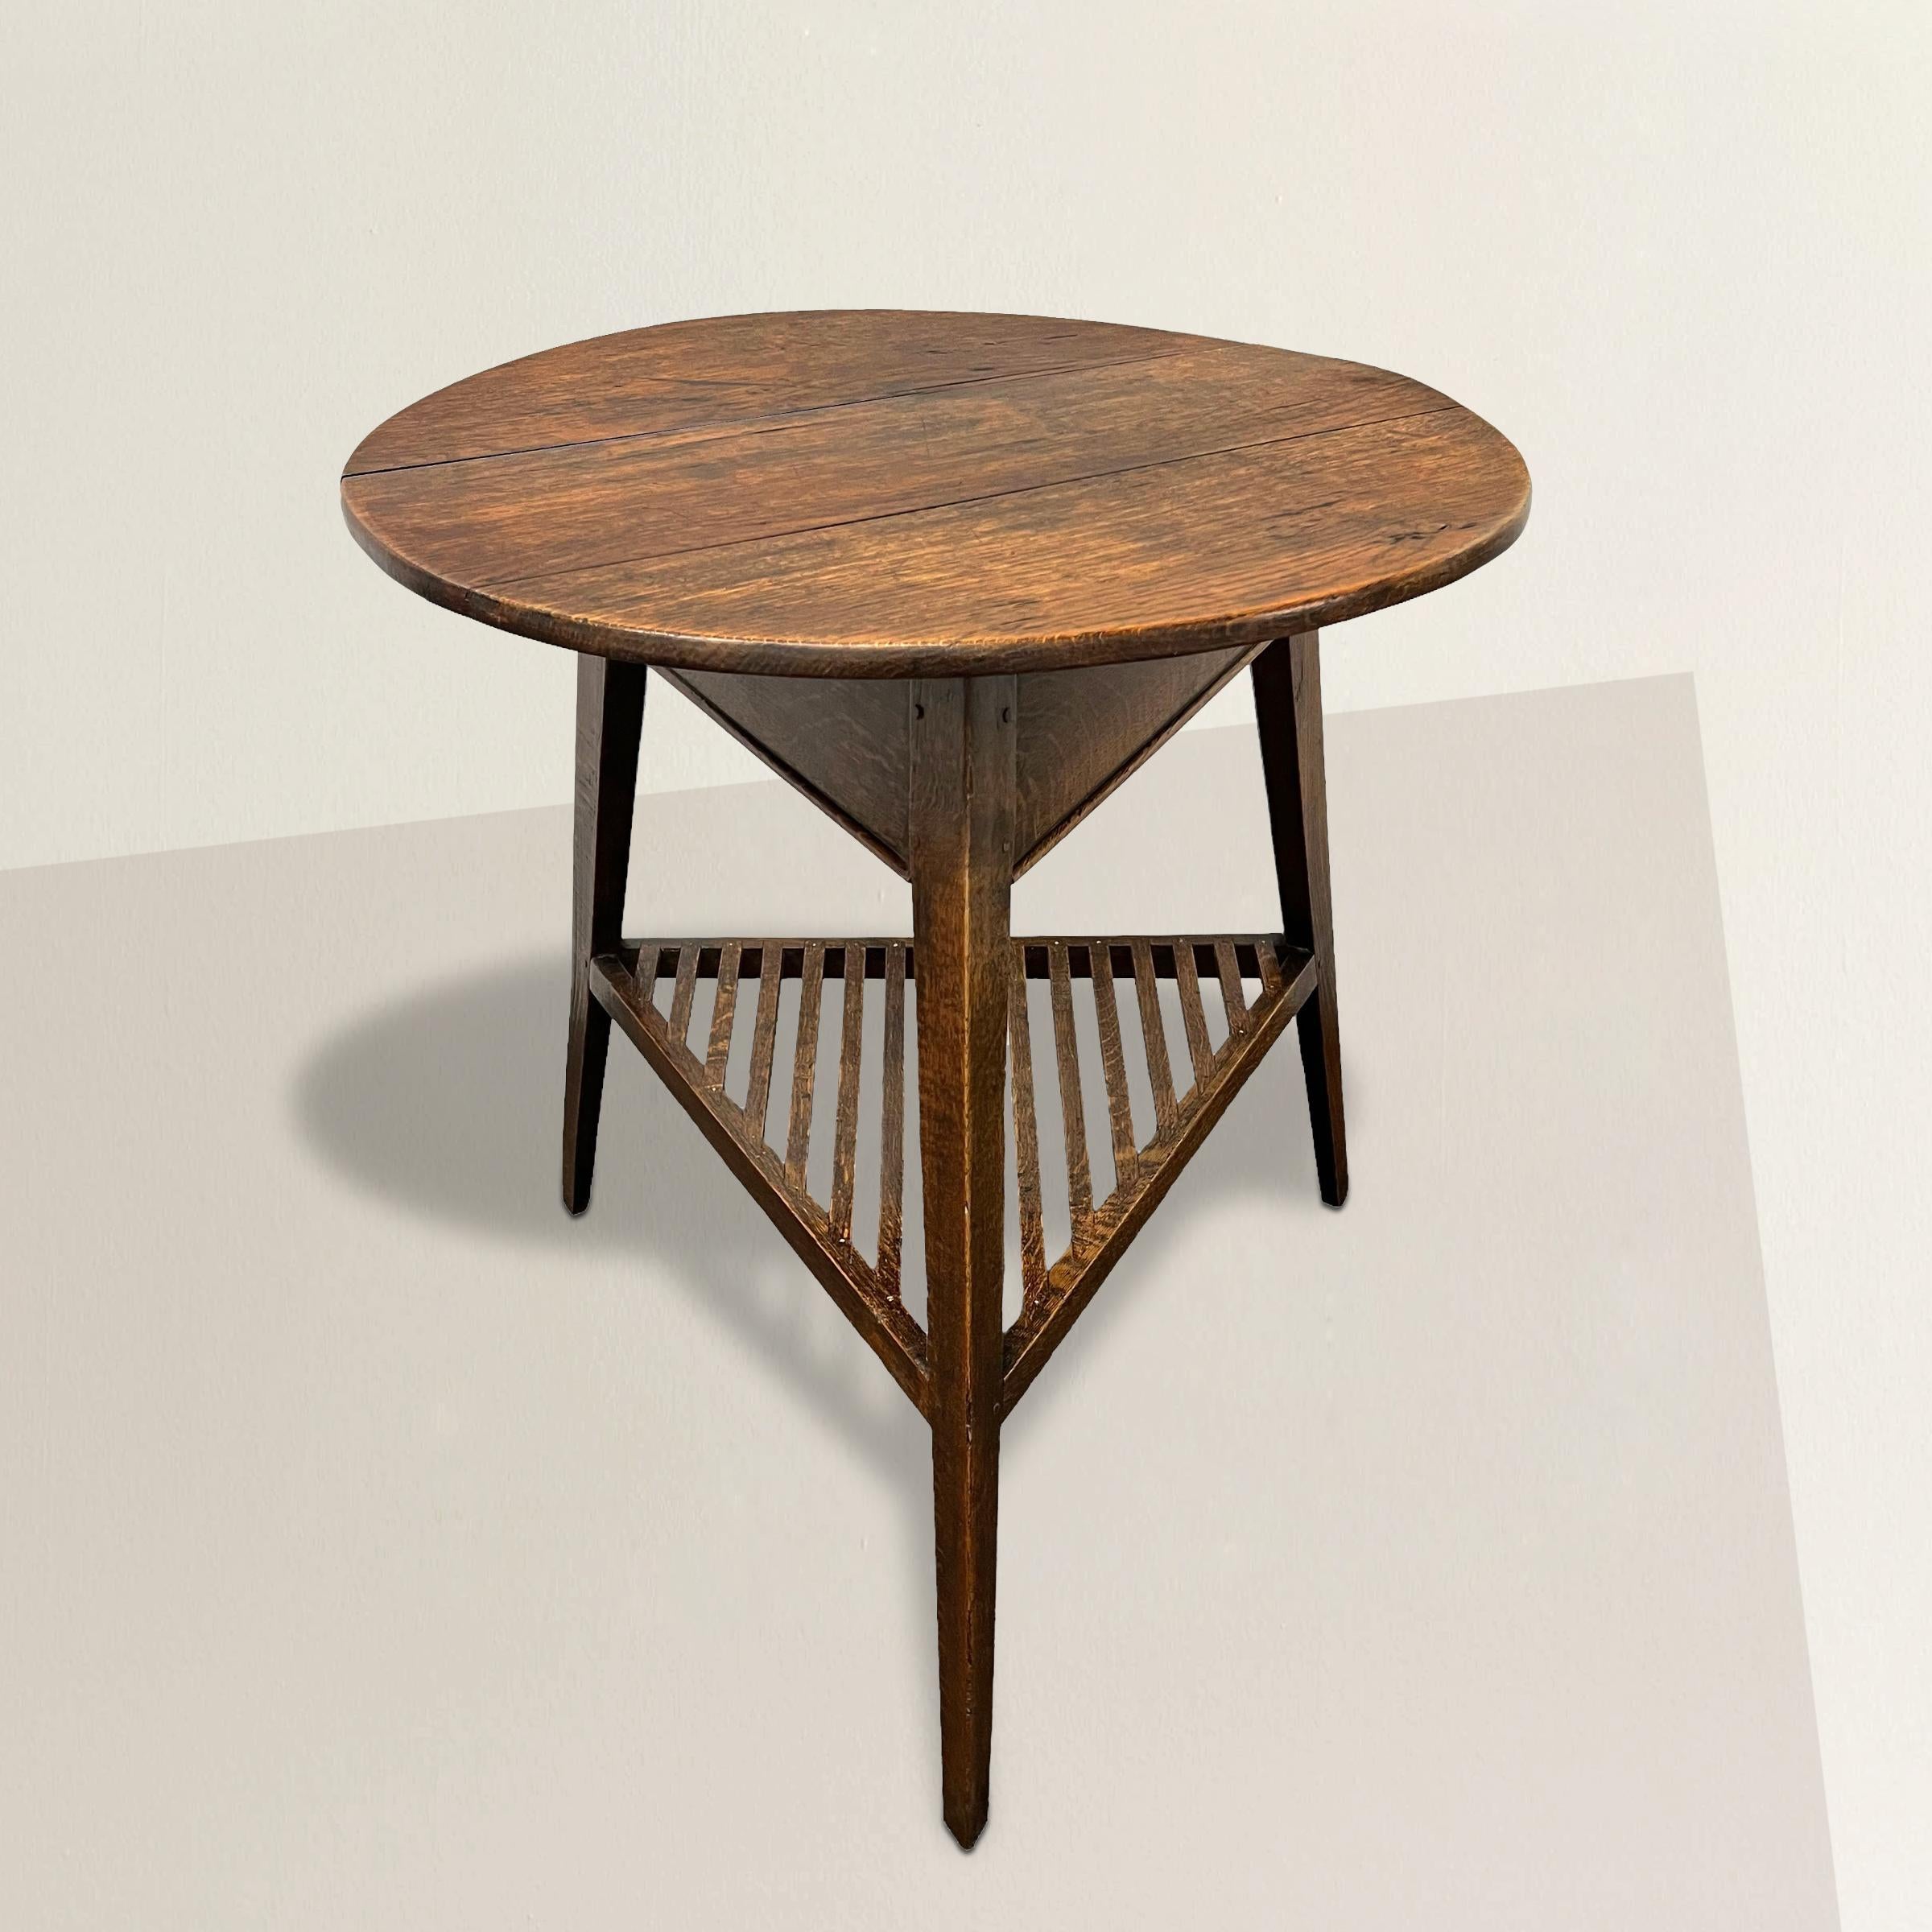 This early 19th-century English oak cricket table epitomizes the charm and functionality of its era. Crafted with meticulous attention to detail, its round top exudes a rustic elegance, while the lattice shelf below adds both practicality and